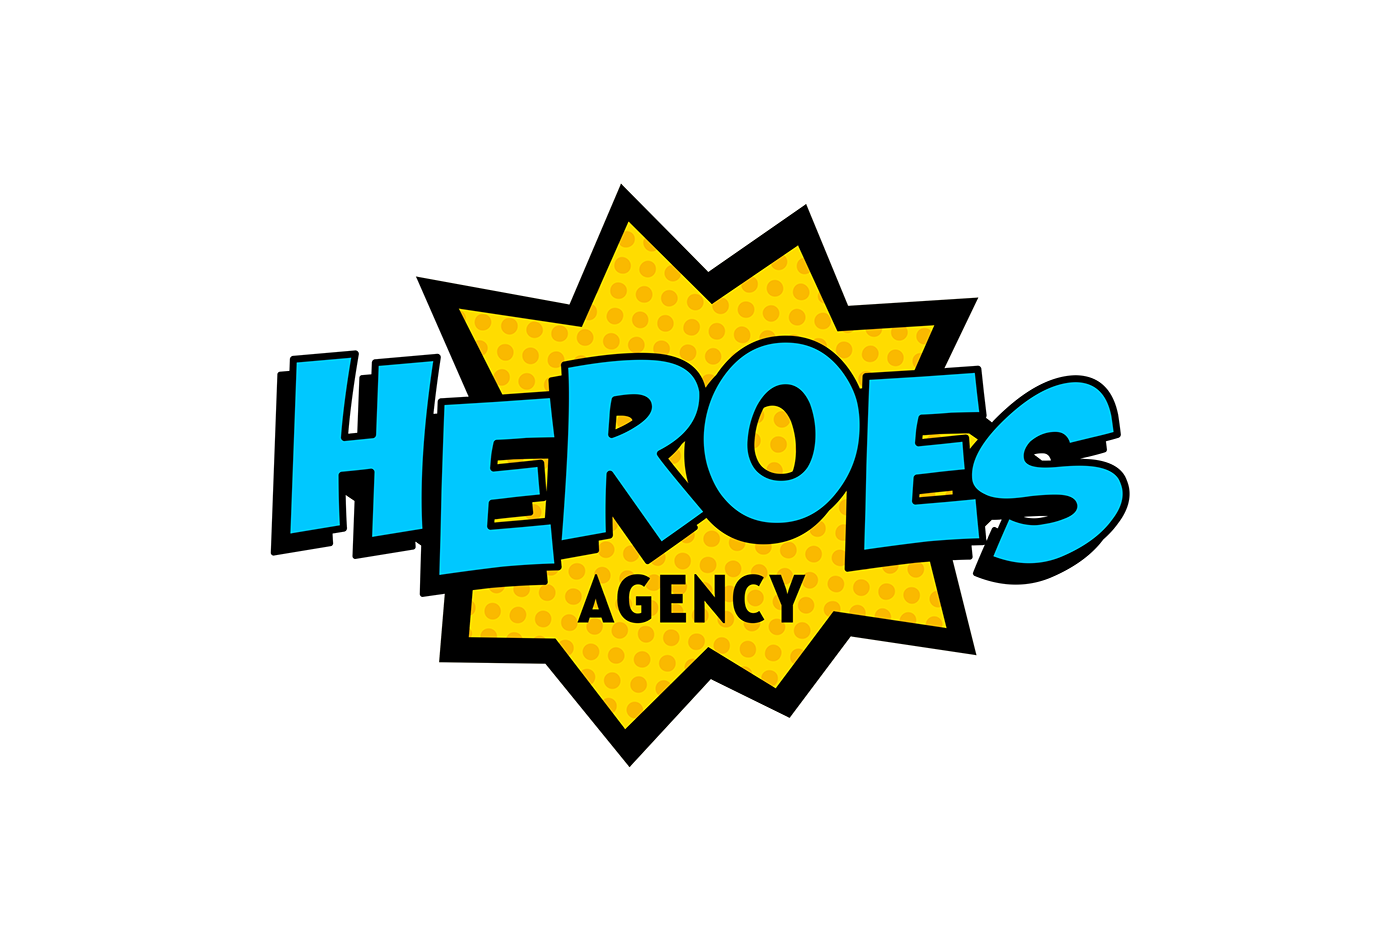 stationary identity Logotype business card letterhead heroes agency Event Hero dots